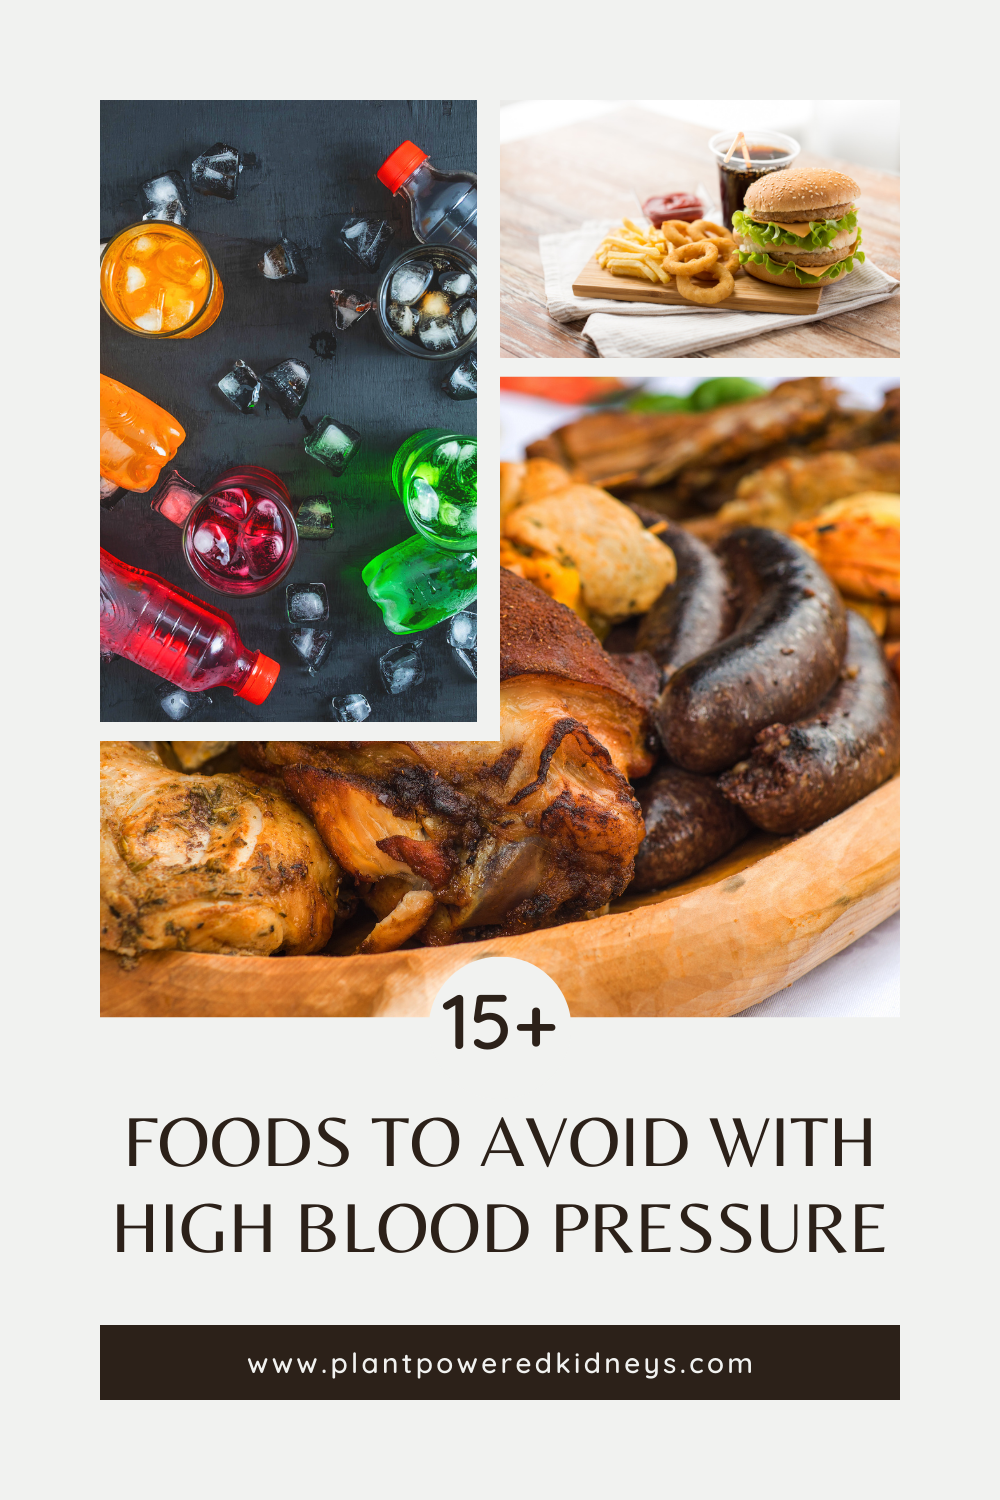 15+ Foods to Avoid with High Blood Pressure